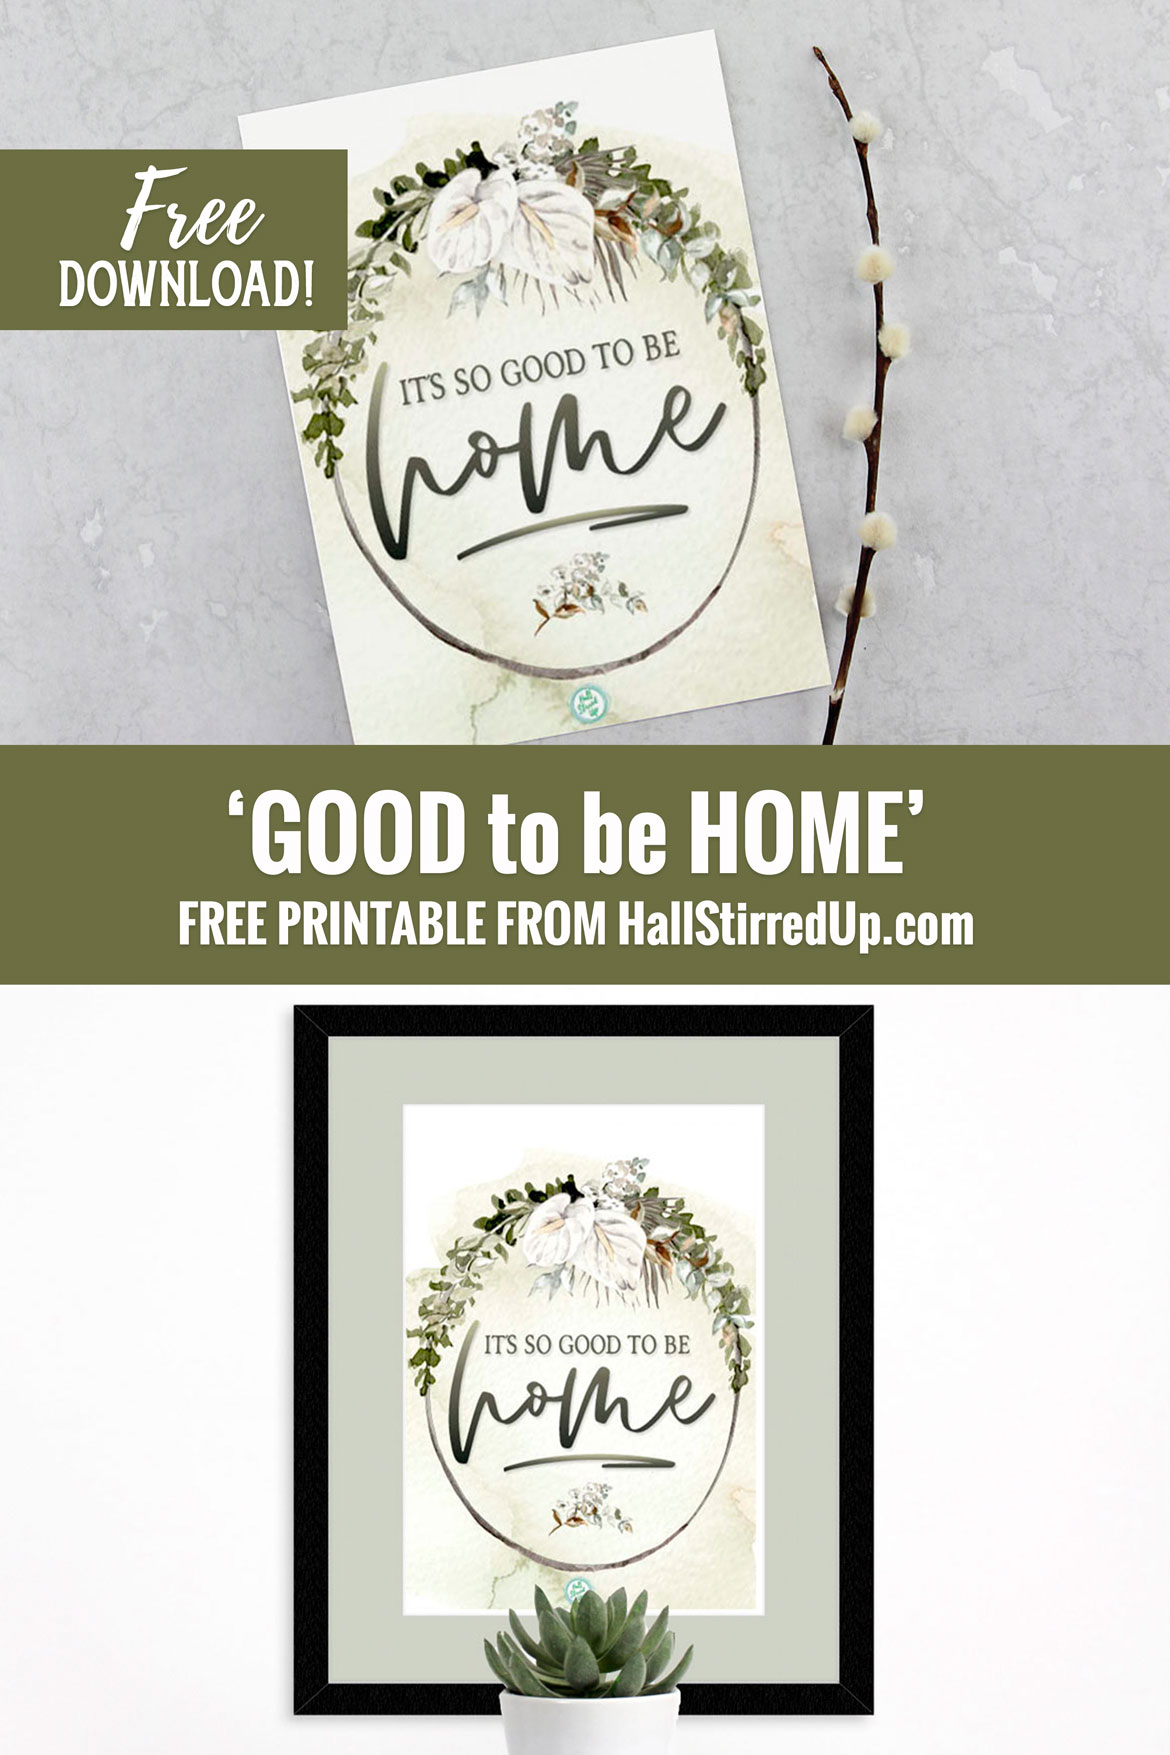 Winter Hygge and a 'Good to be Home' printable